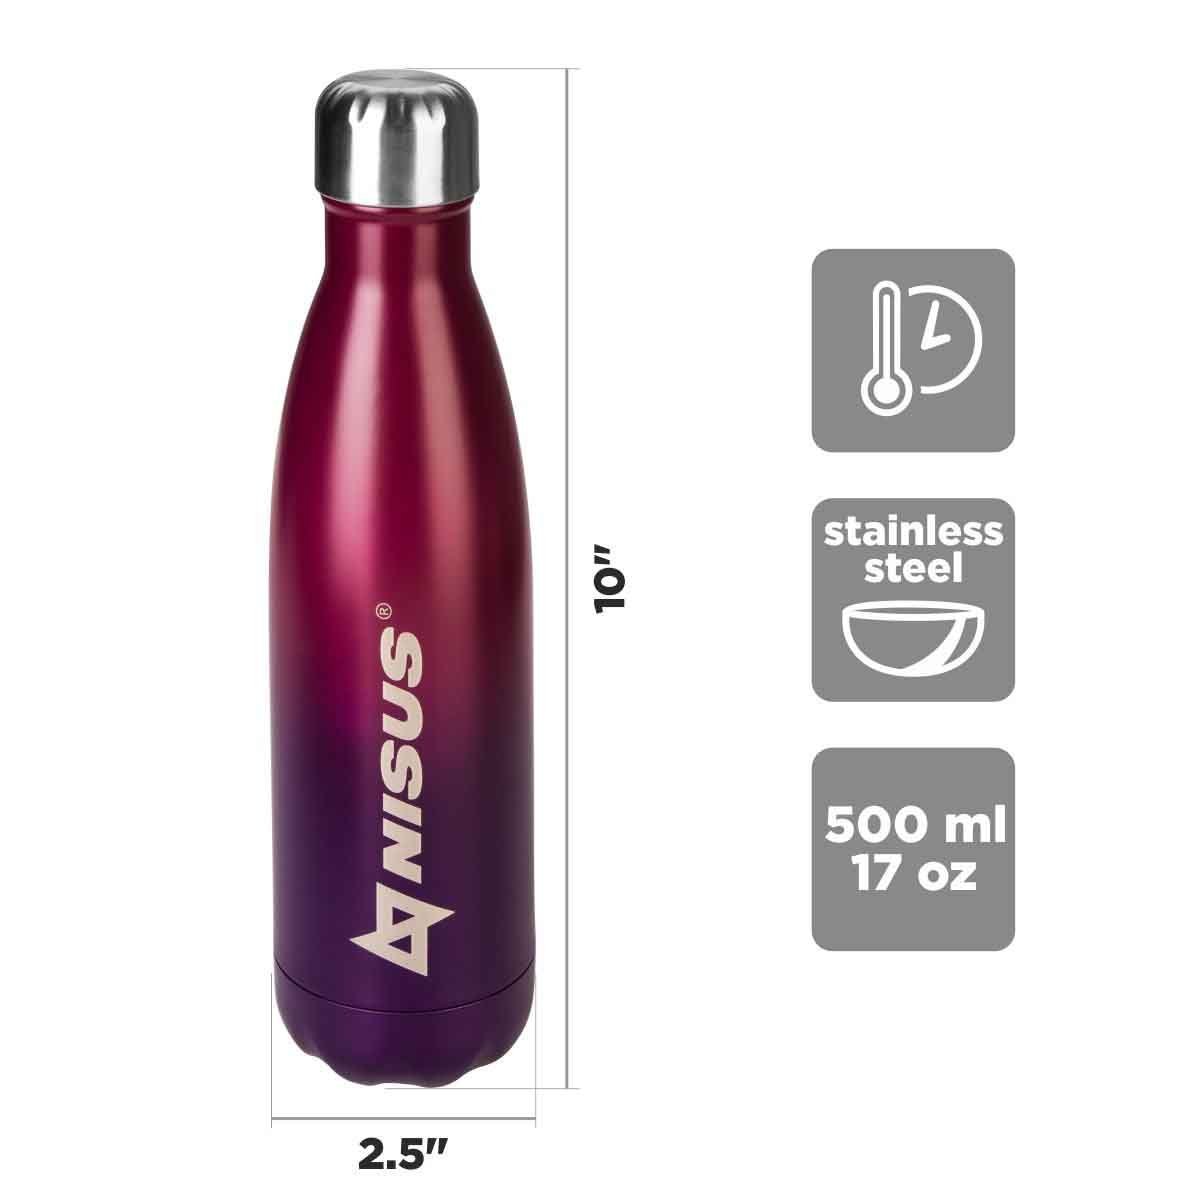 Stainless Steel Insulated Twist Top Water Bottle, 17 oz is 10 inches high and 2.5 inched wide